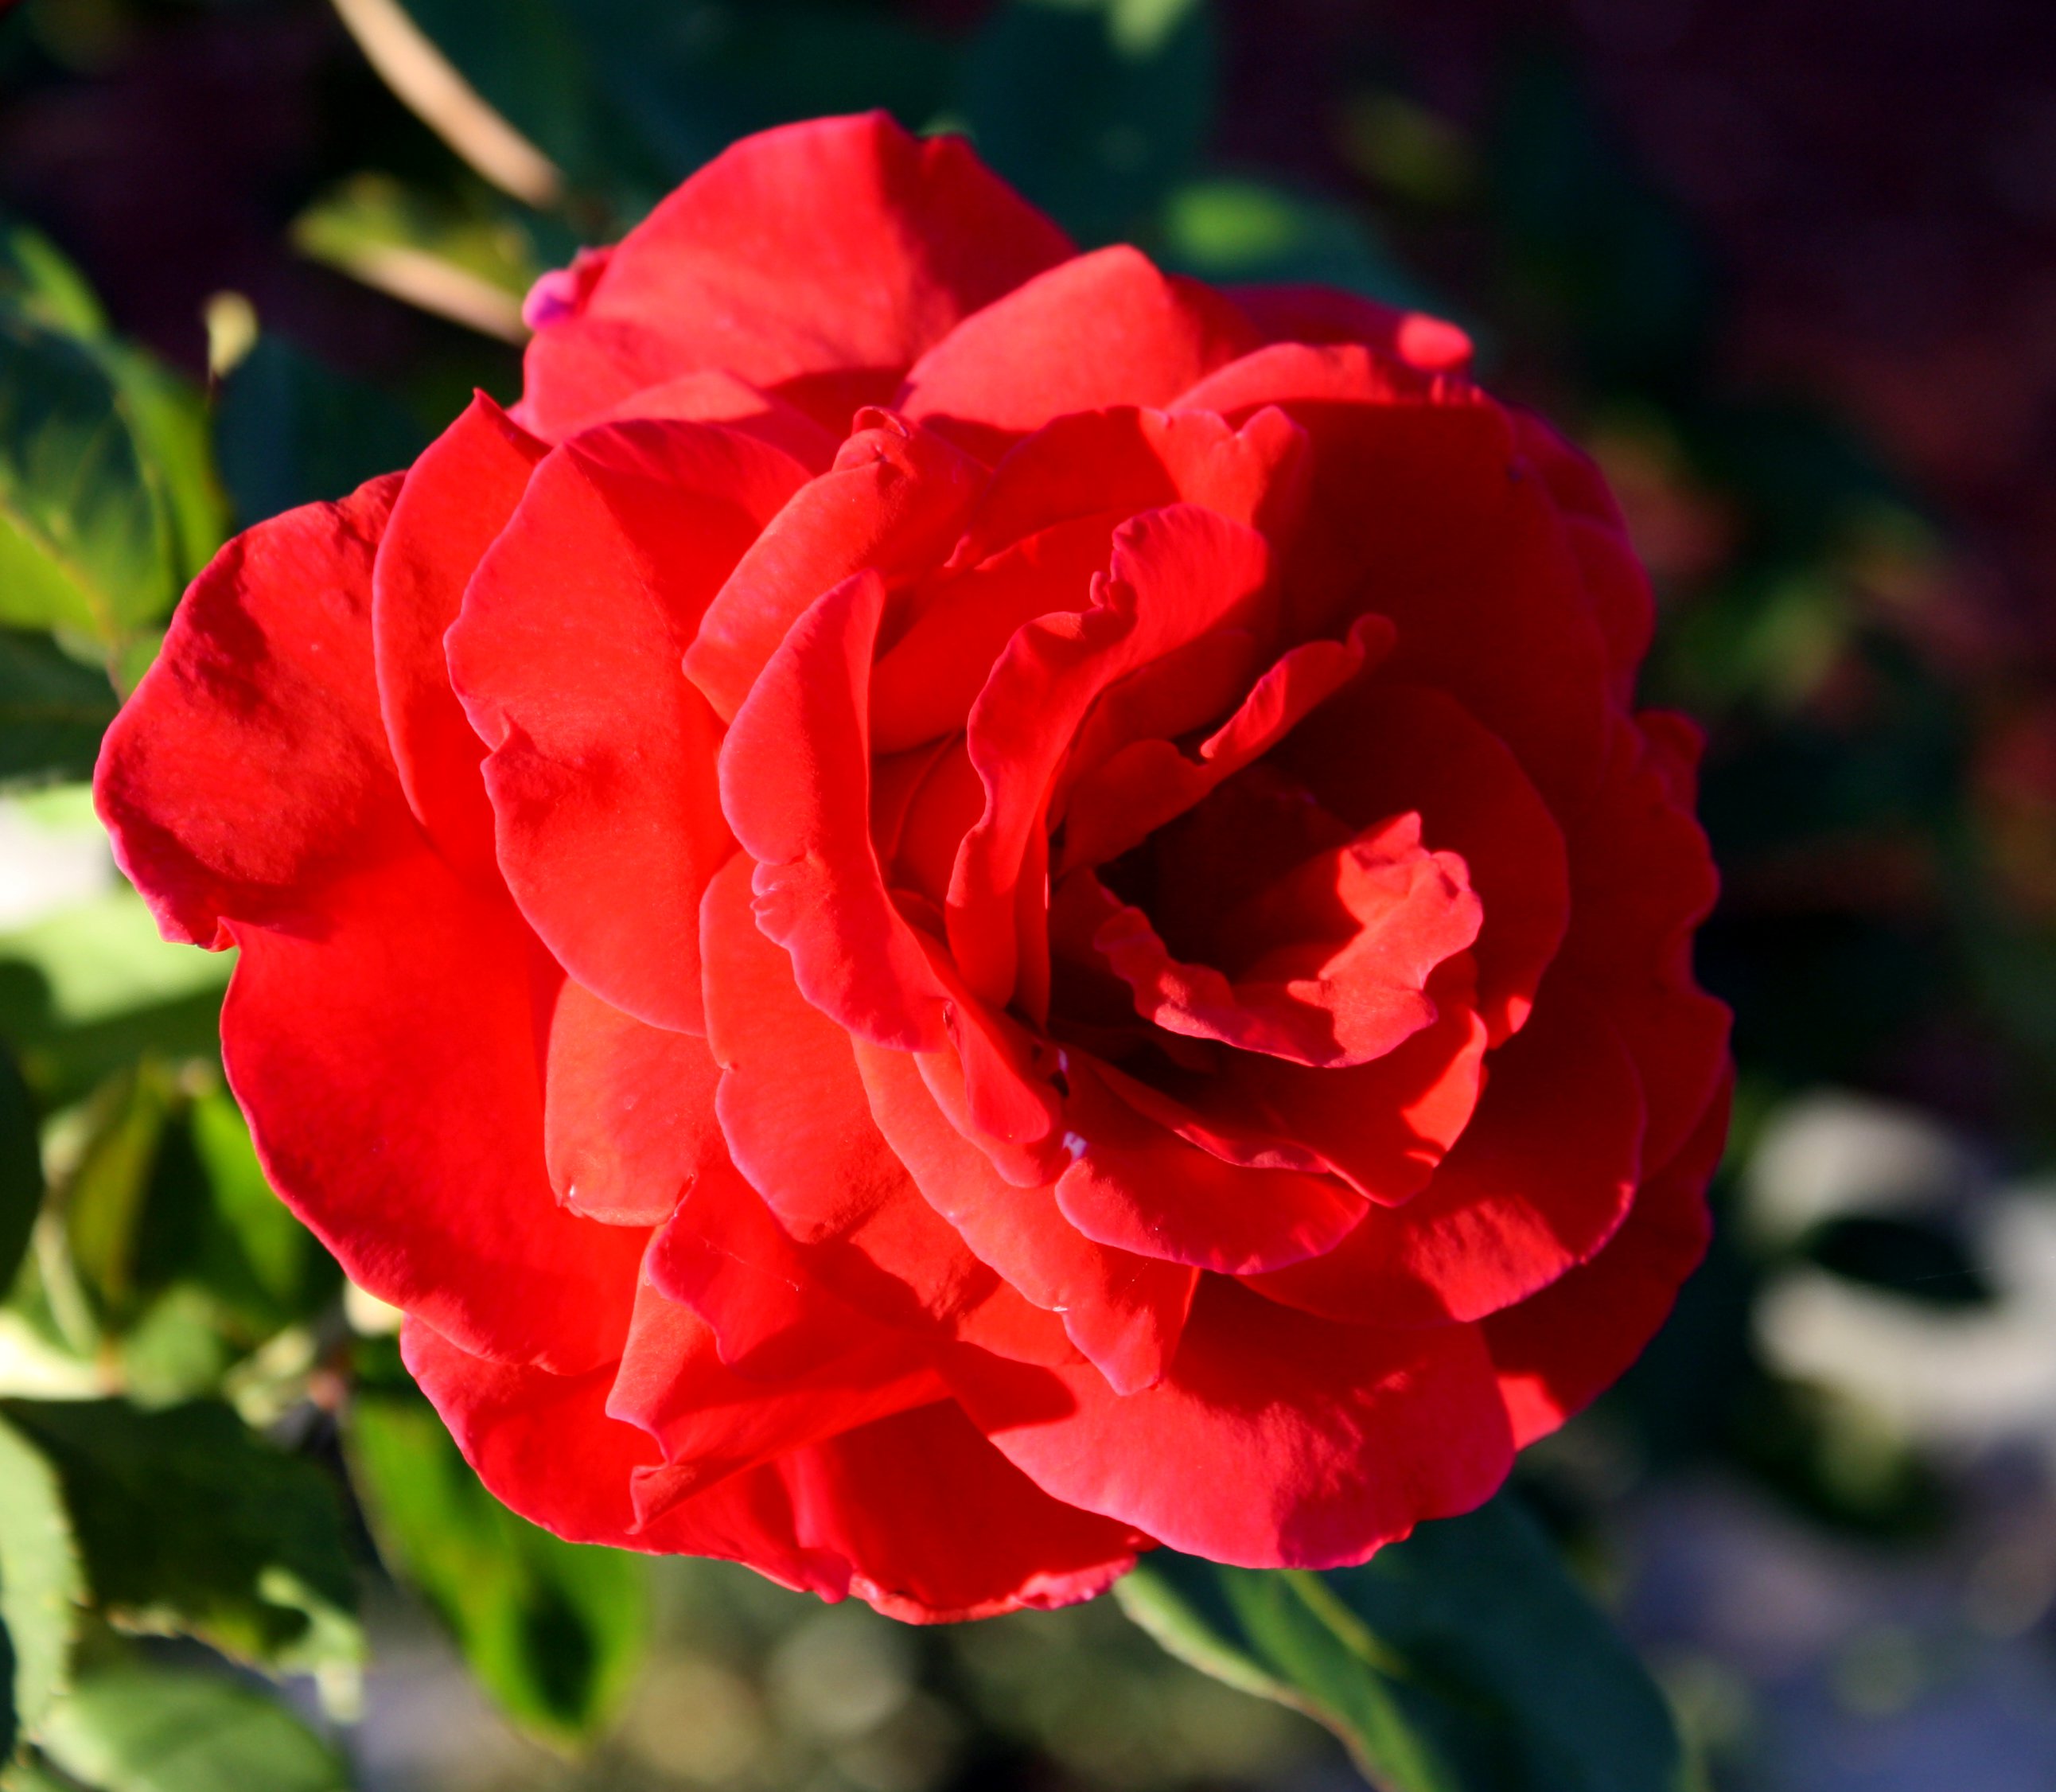 red-rose-in-bloom-picture-free-photograph-photos-public-domain